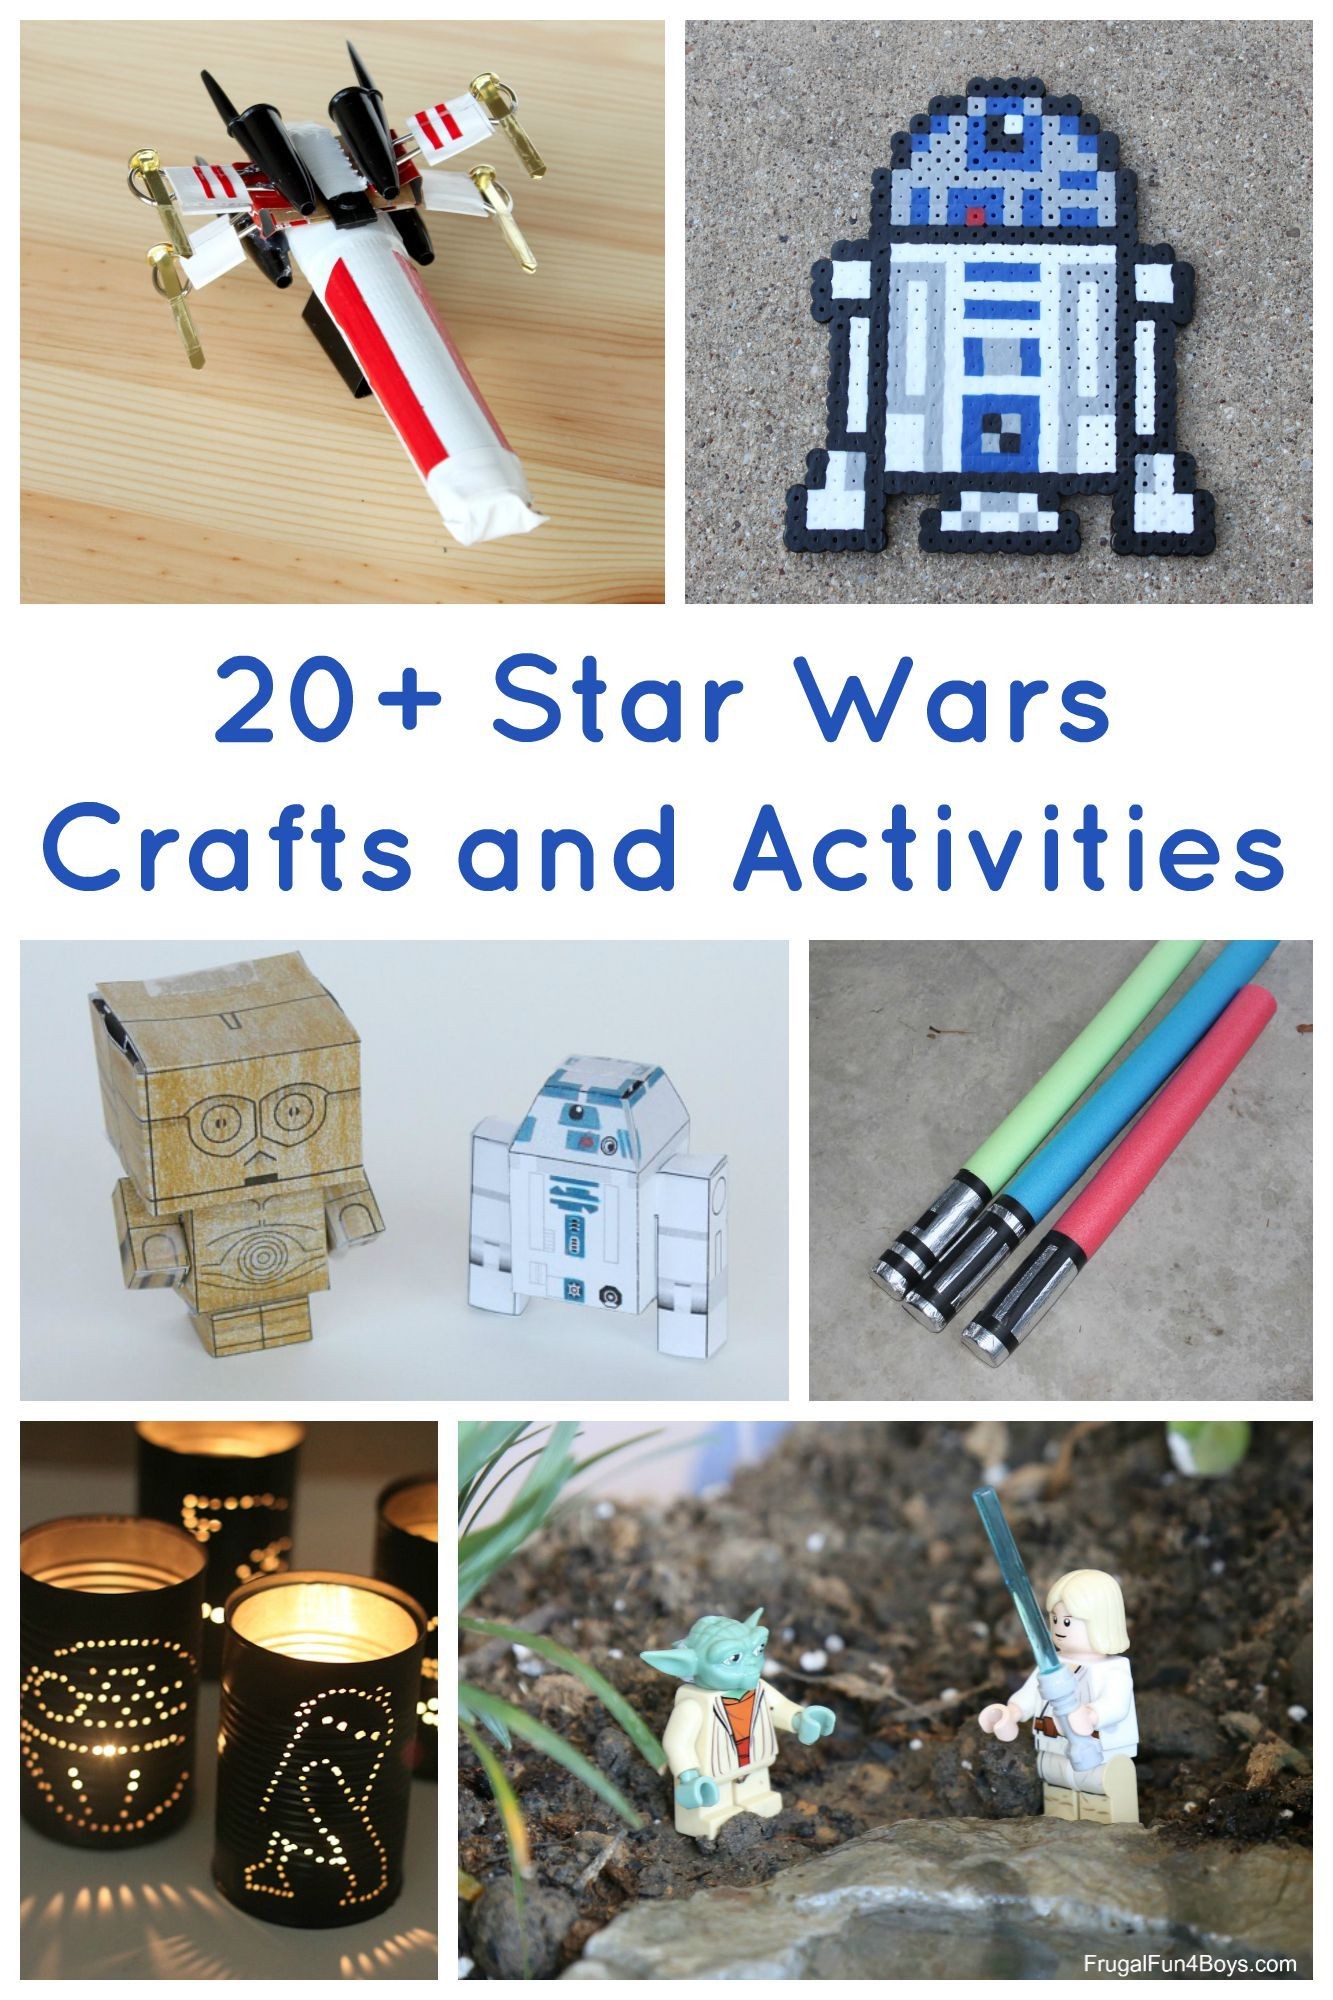 Lightsaber Papercraft Star Wars Crafts and Activities for Kids